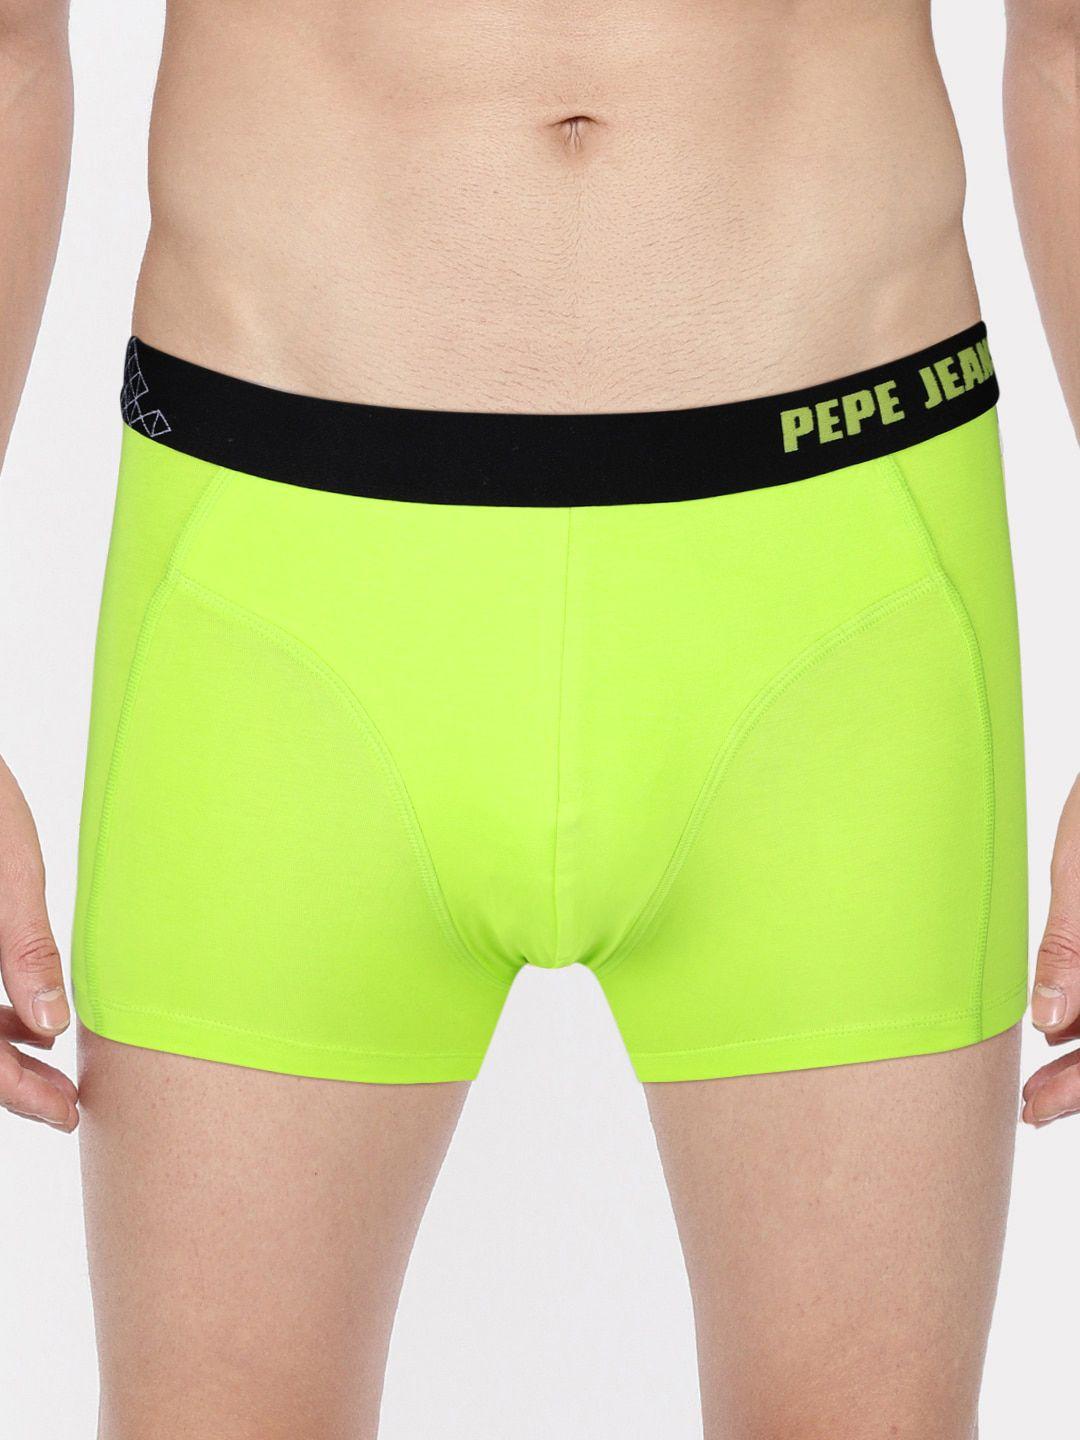 pepe jeans men fluorescent yellow solid modern trunk